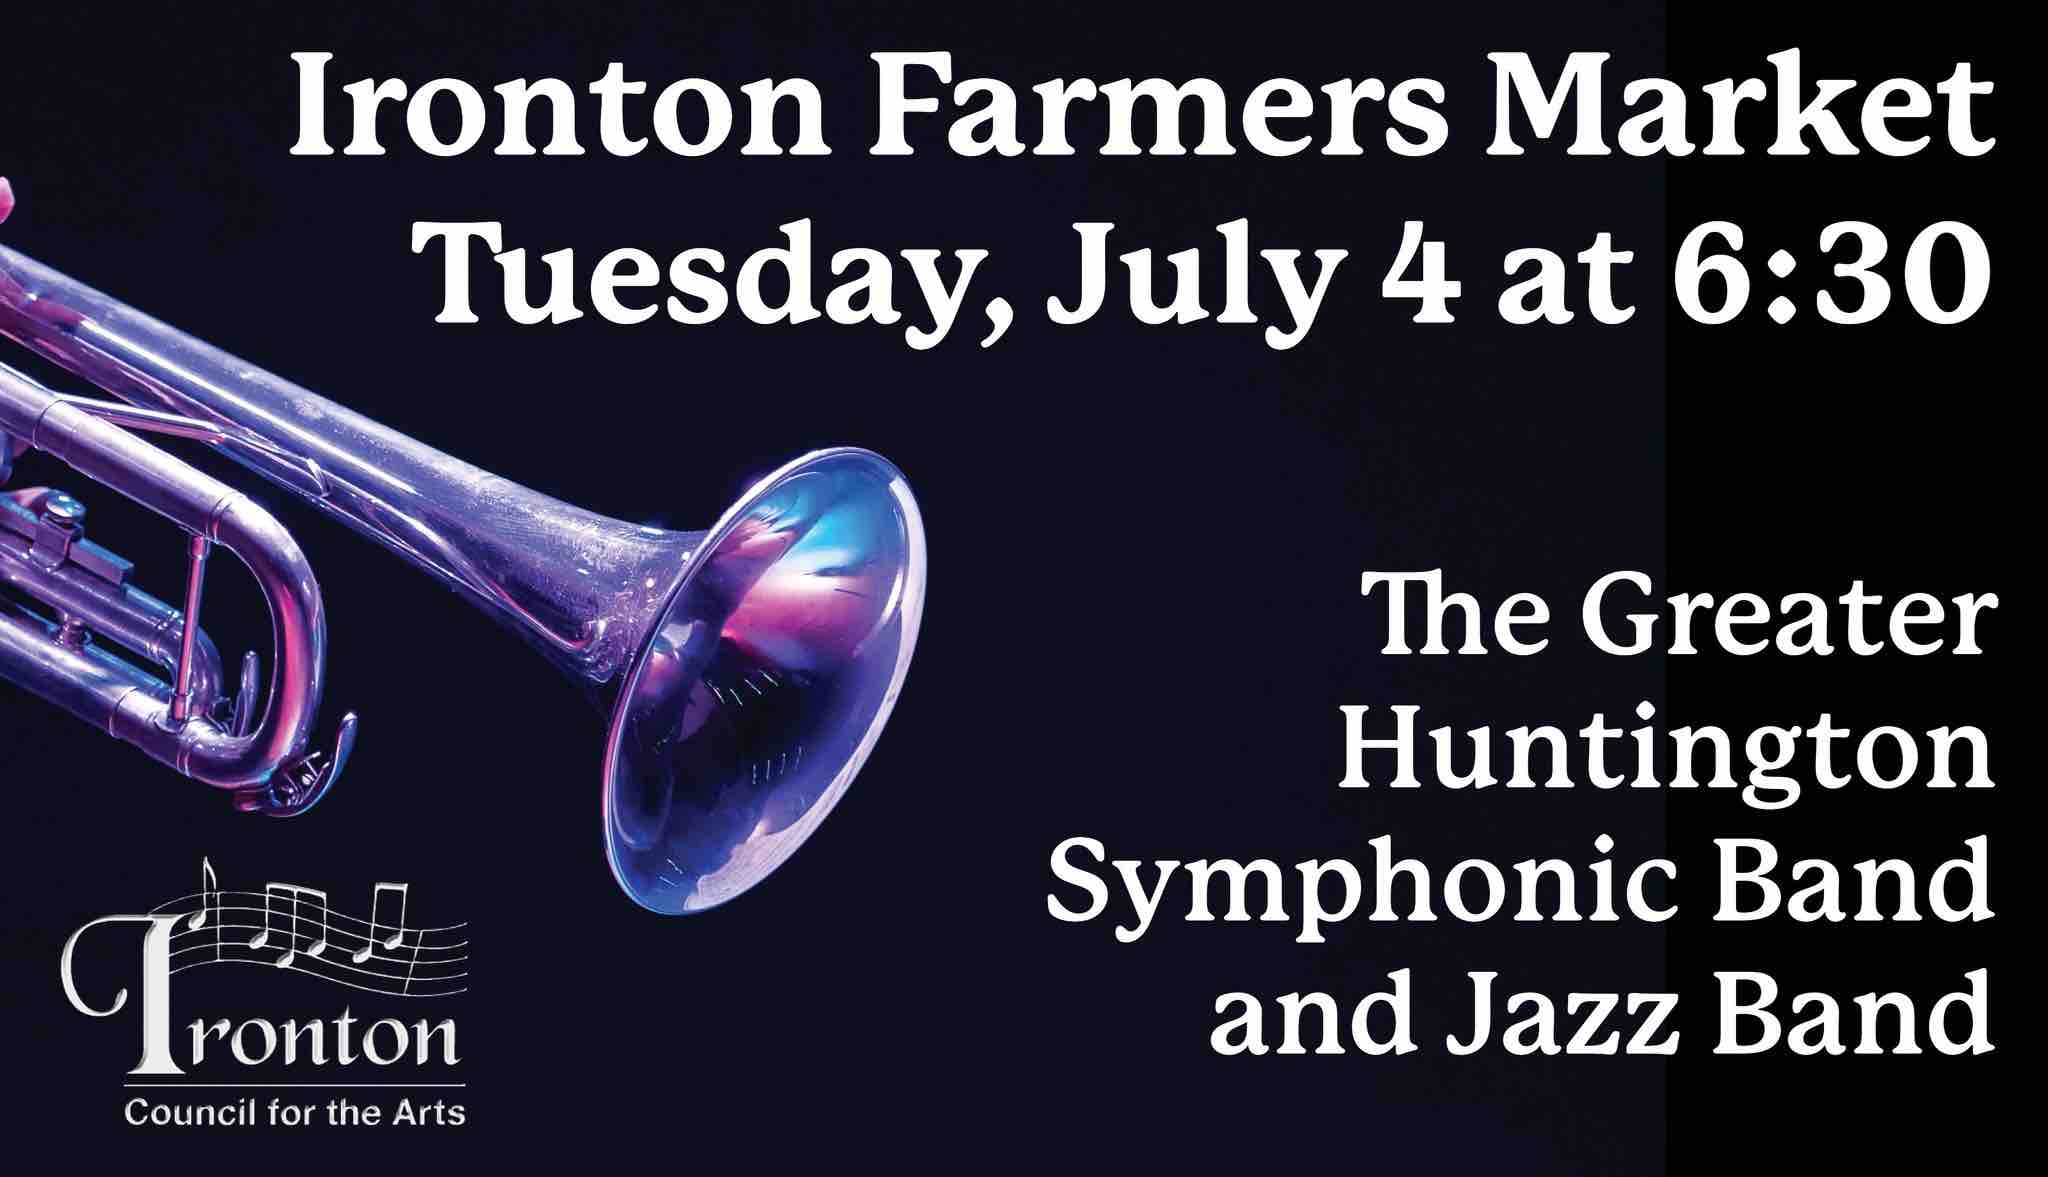 An image reading "Ironton Farmers Market Tuesday, July 4 at 6:30 The Greater Huntington Symphonic Band and Jazz Band." The image is black and has a picture of a trumpet on it.